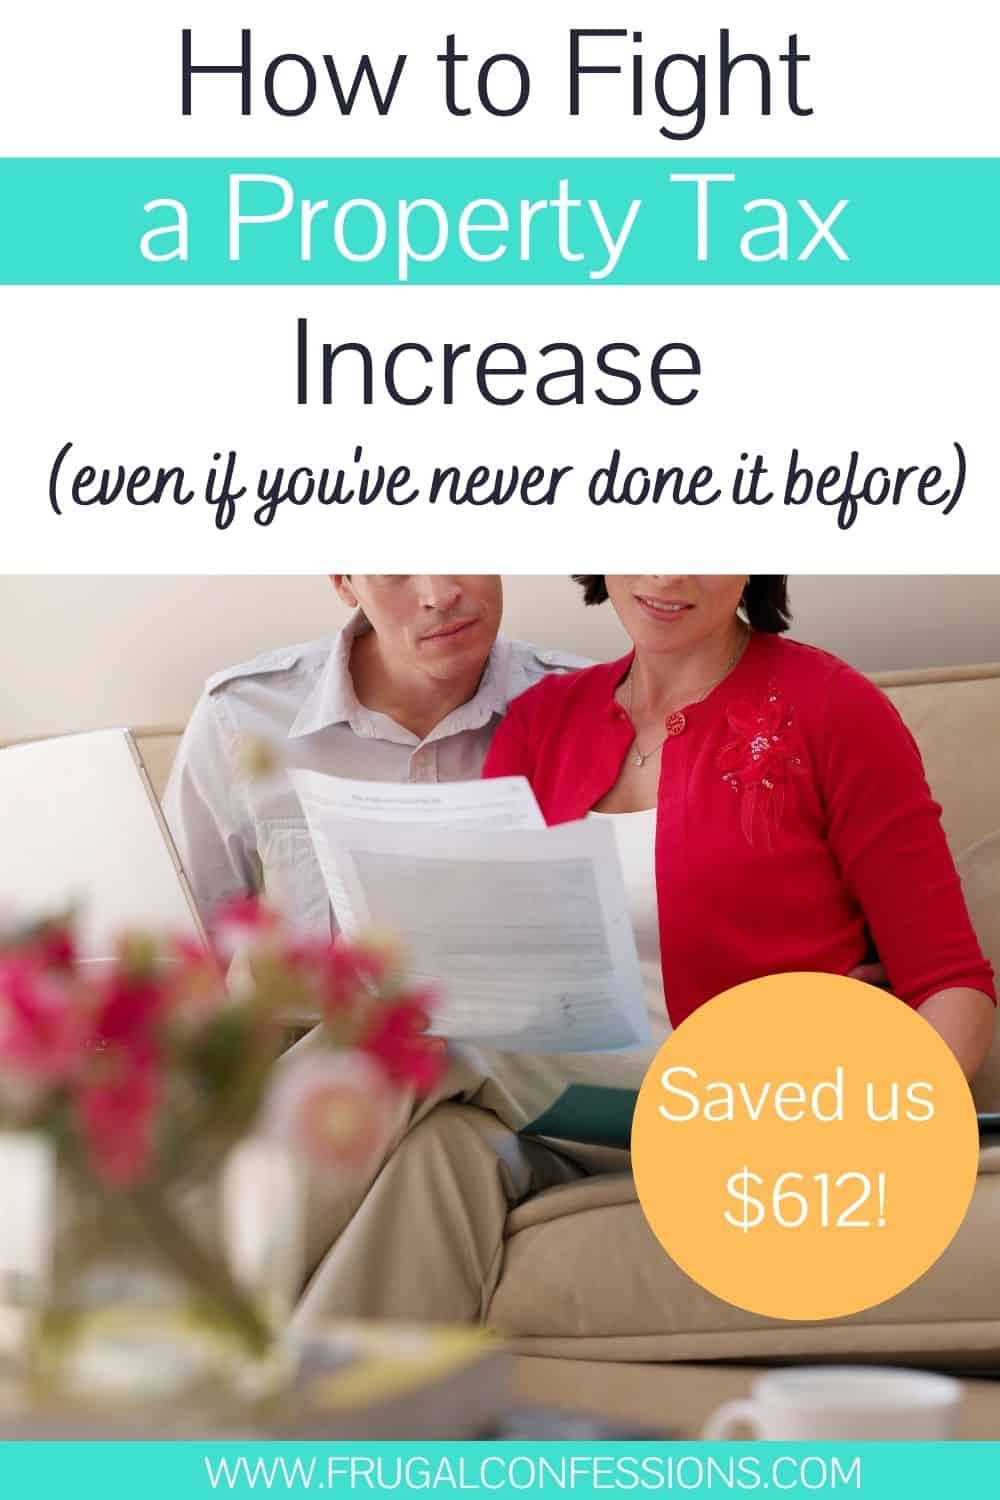 homeowner couple on couch with property tax assessment paper, text overlay, "how to fight property tax increase, even if you've never done it before - saved us $612"